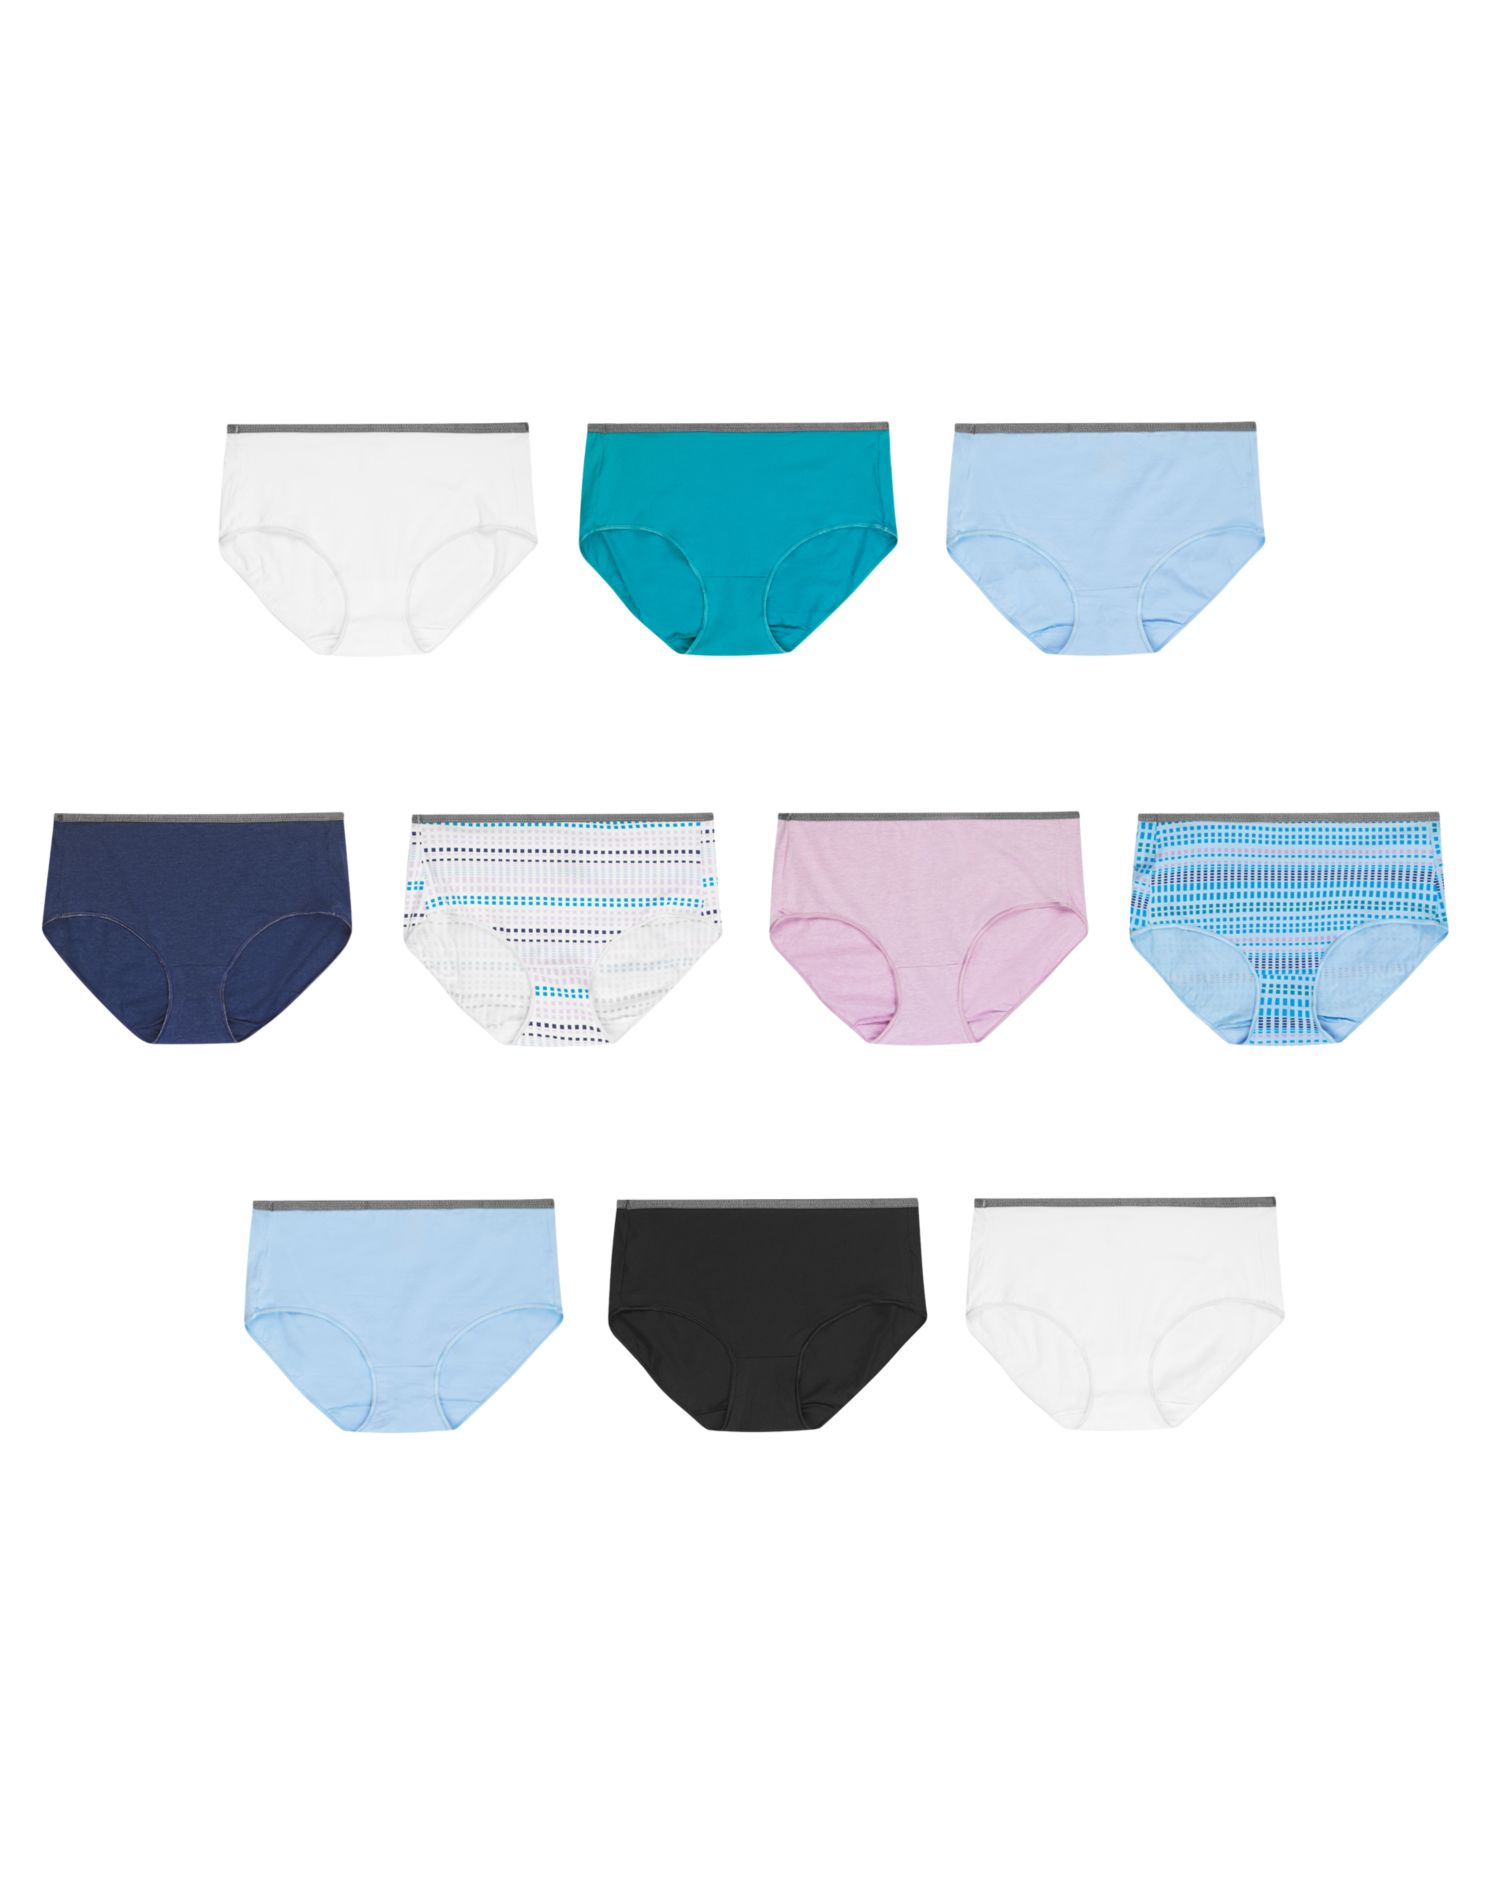 Hanes Womens Cool Comfort Cotton Stretch Thong 10-Pack, 9, Assorted 